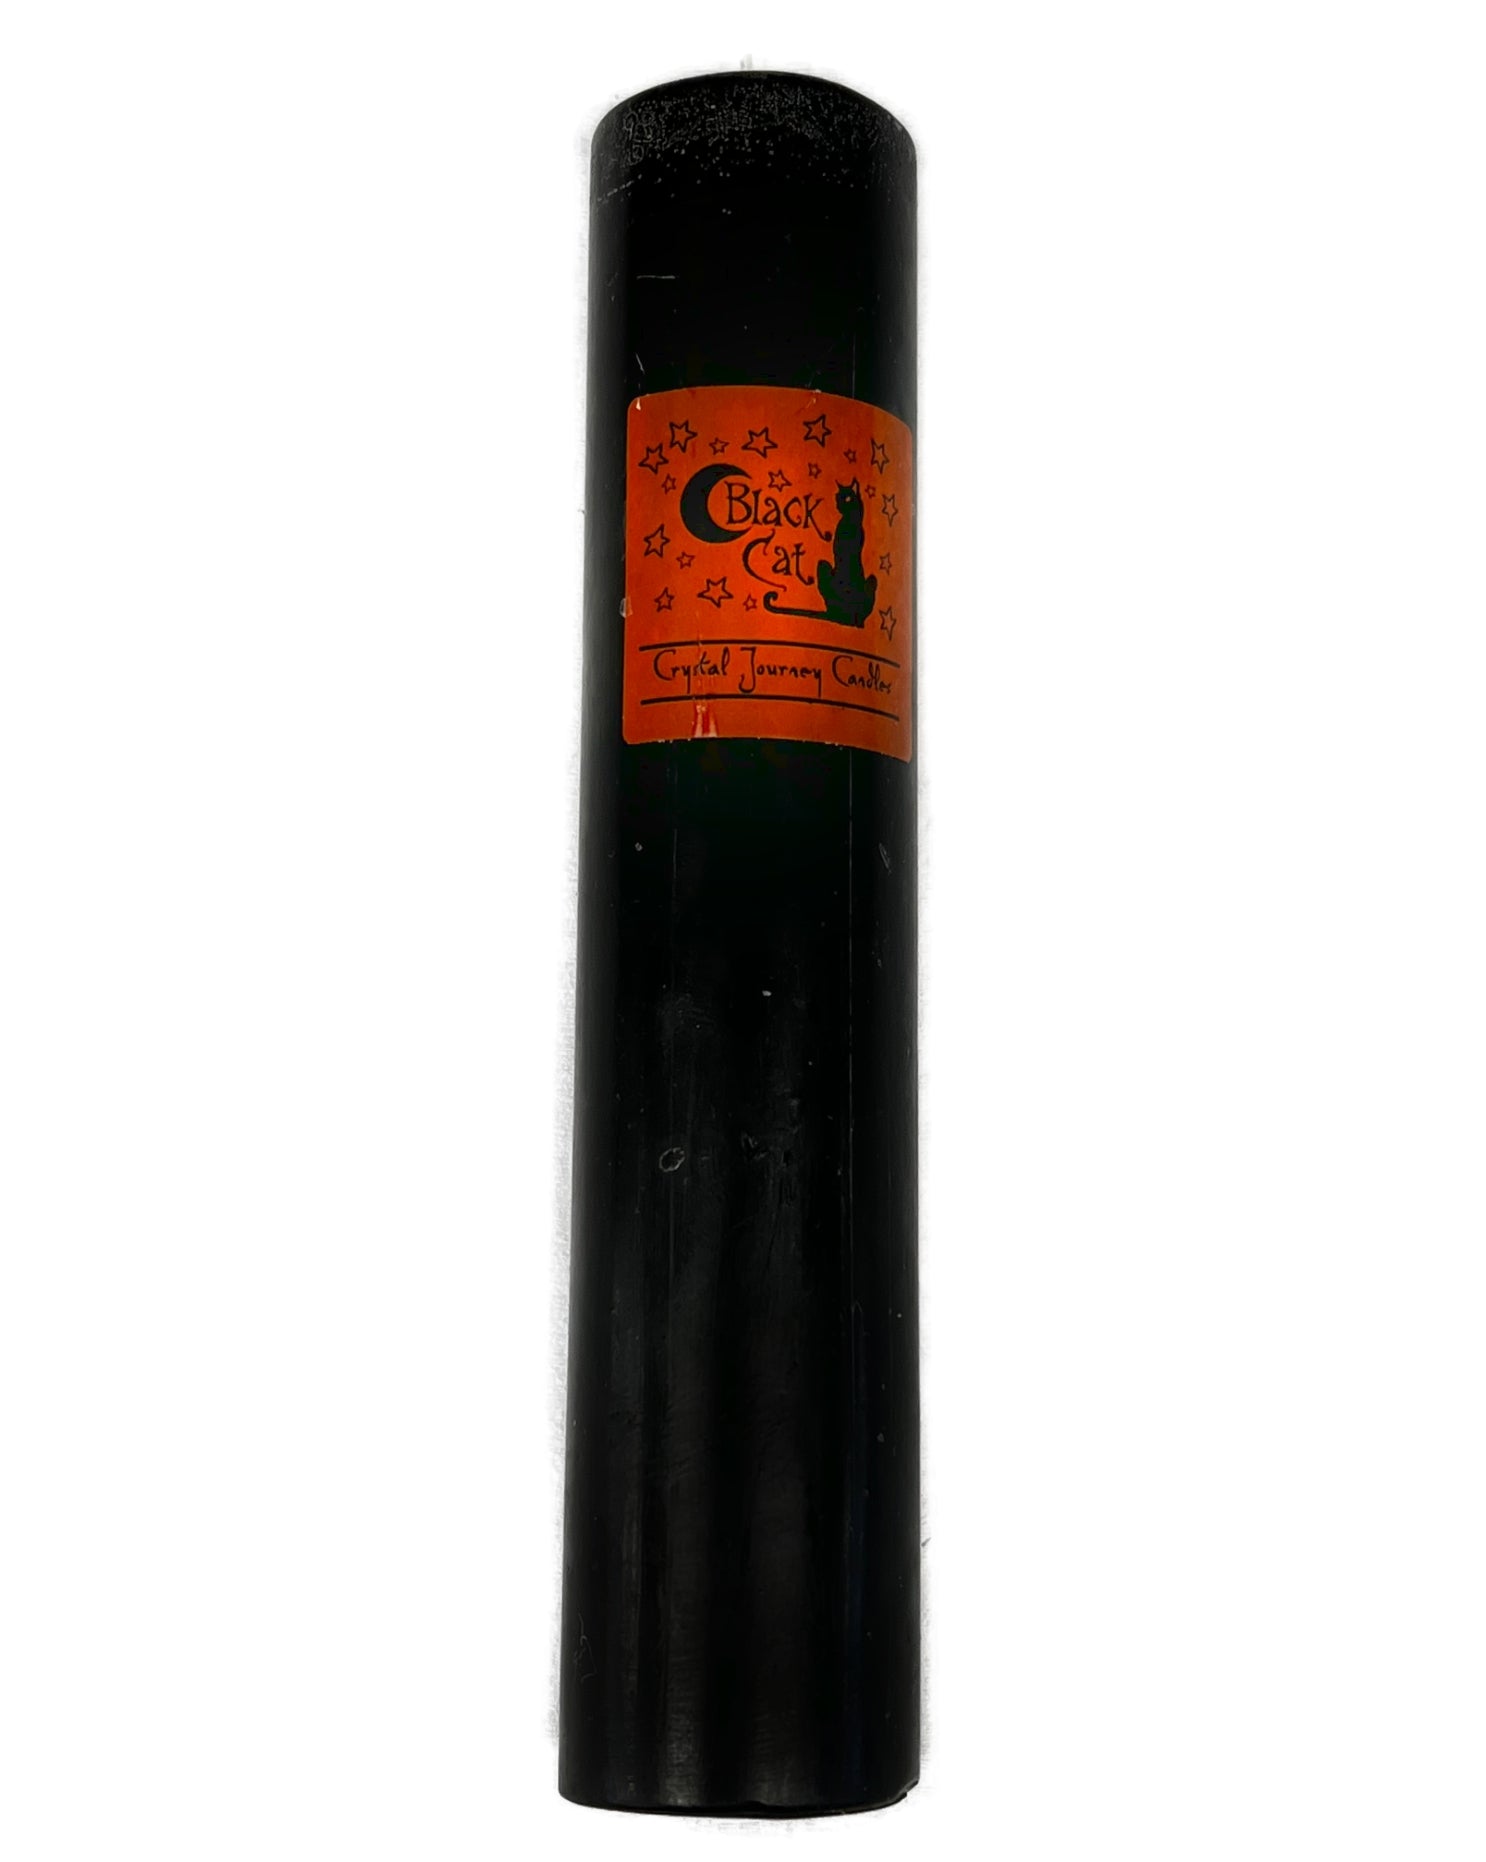 Tall Black candle with orange cat decal 